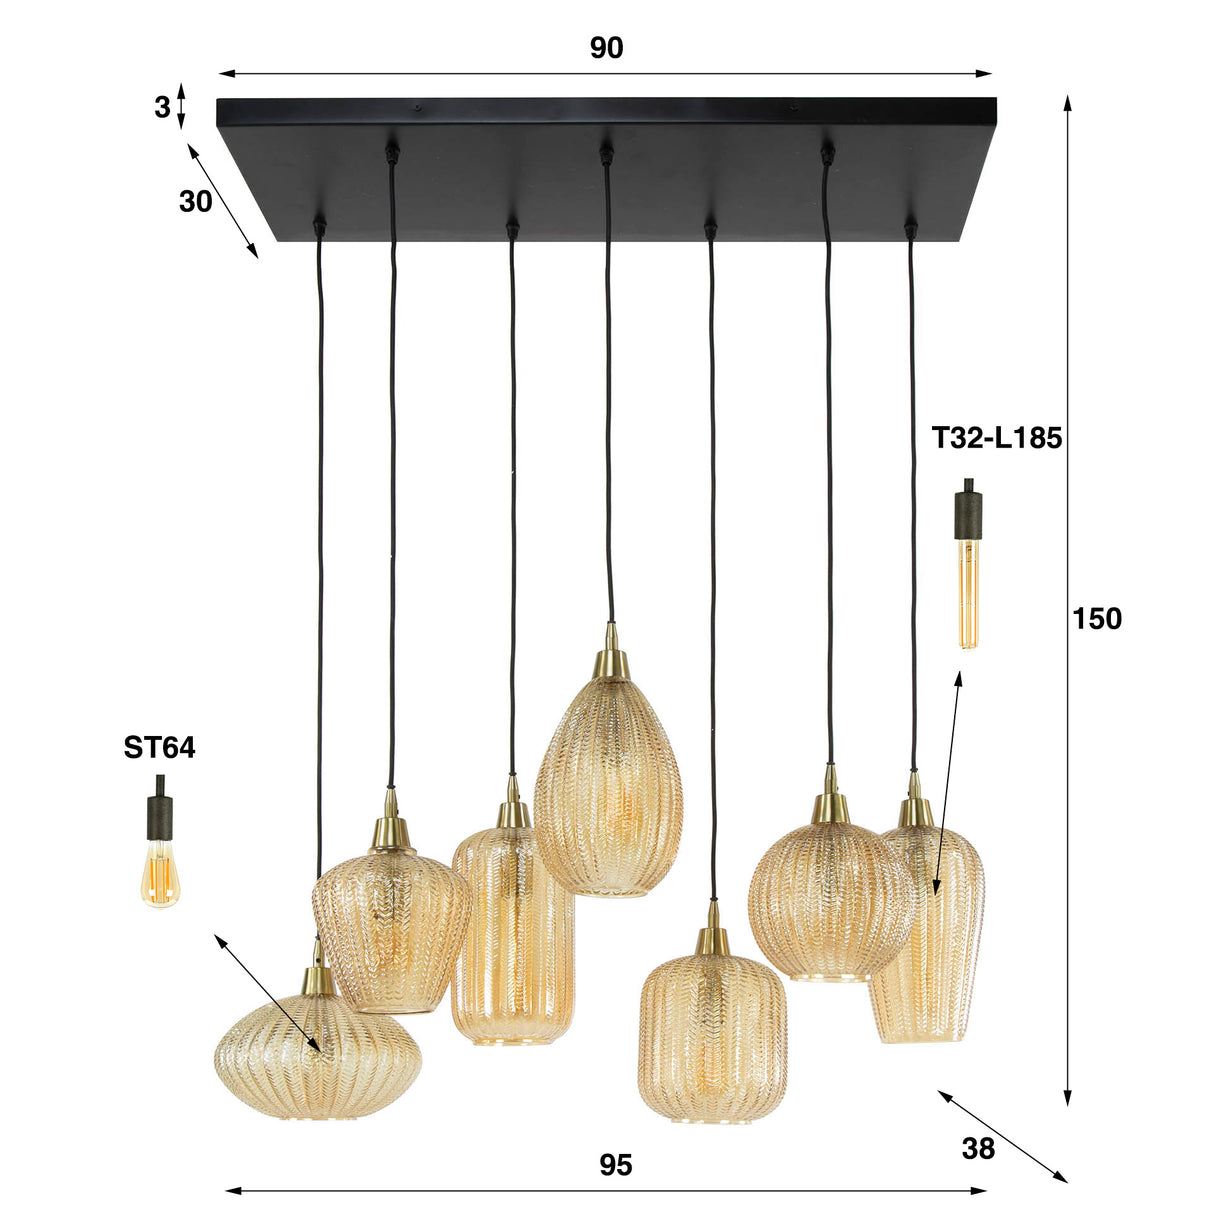 Hanglamp Olaf DH Interior Amber color glas LxBxH 96x47x46 Amber color glas Witfoto maatindicatie